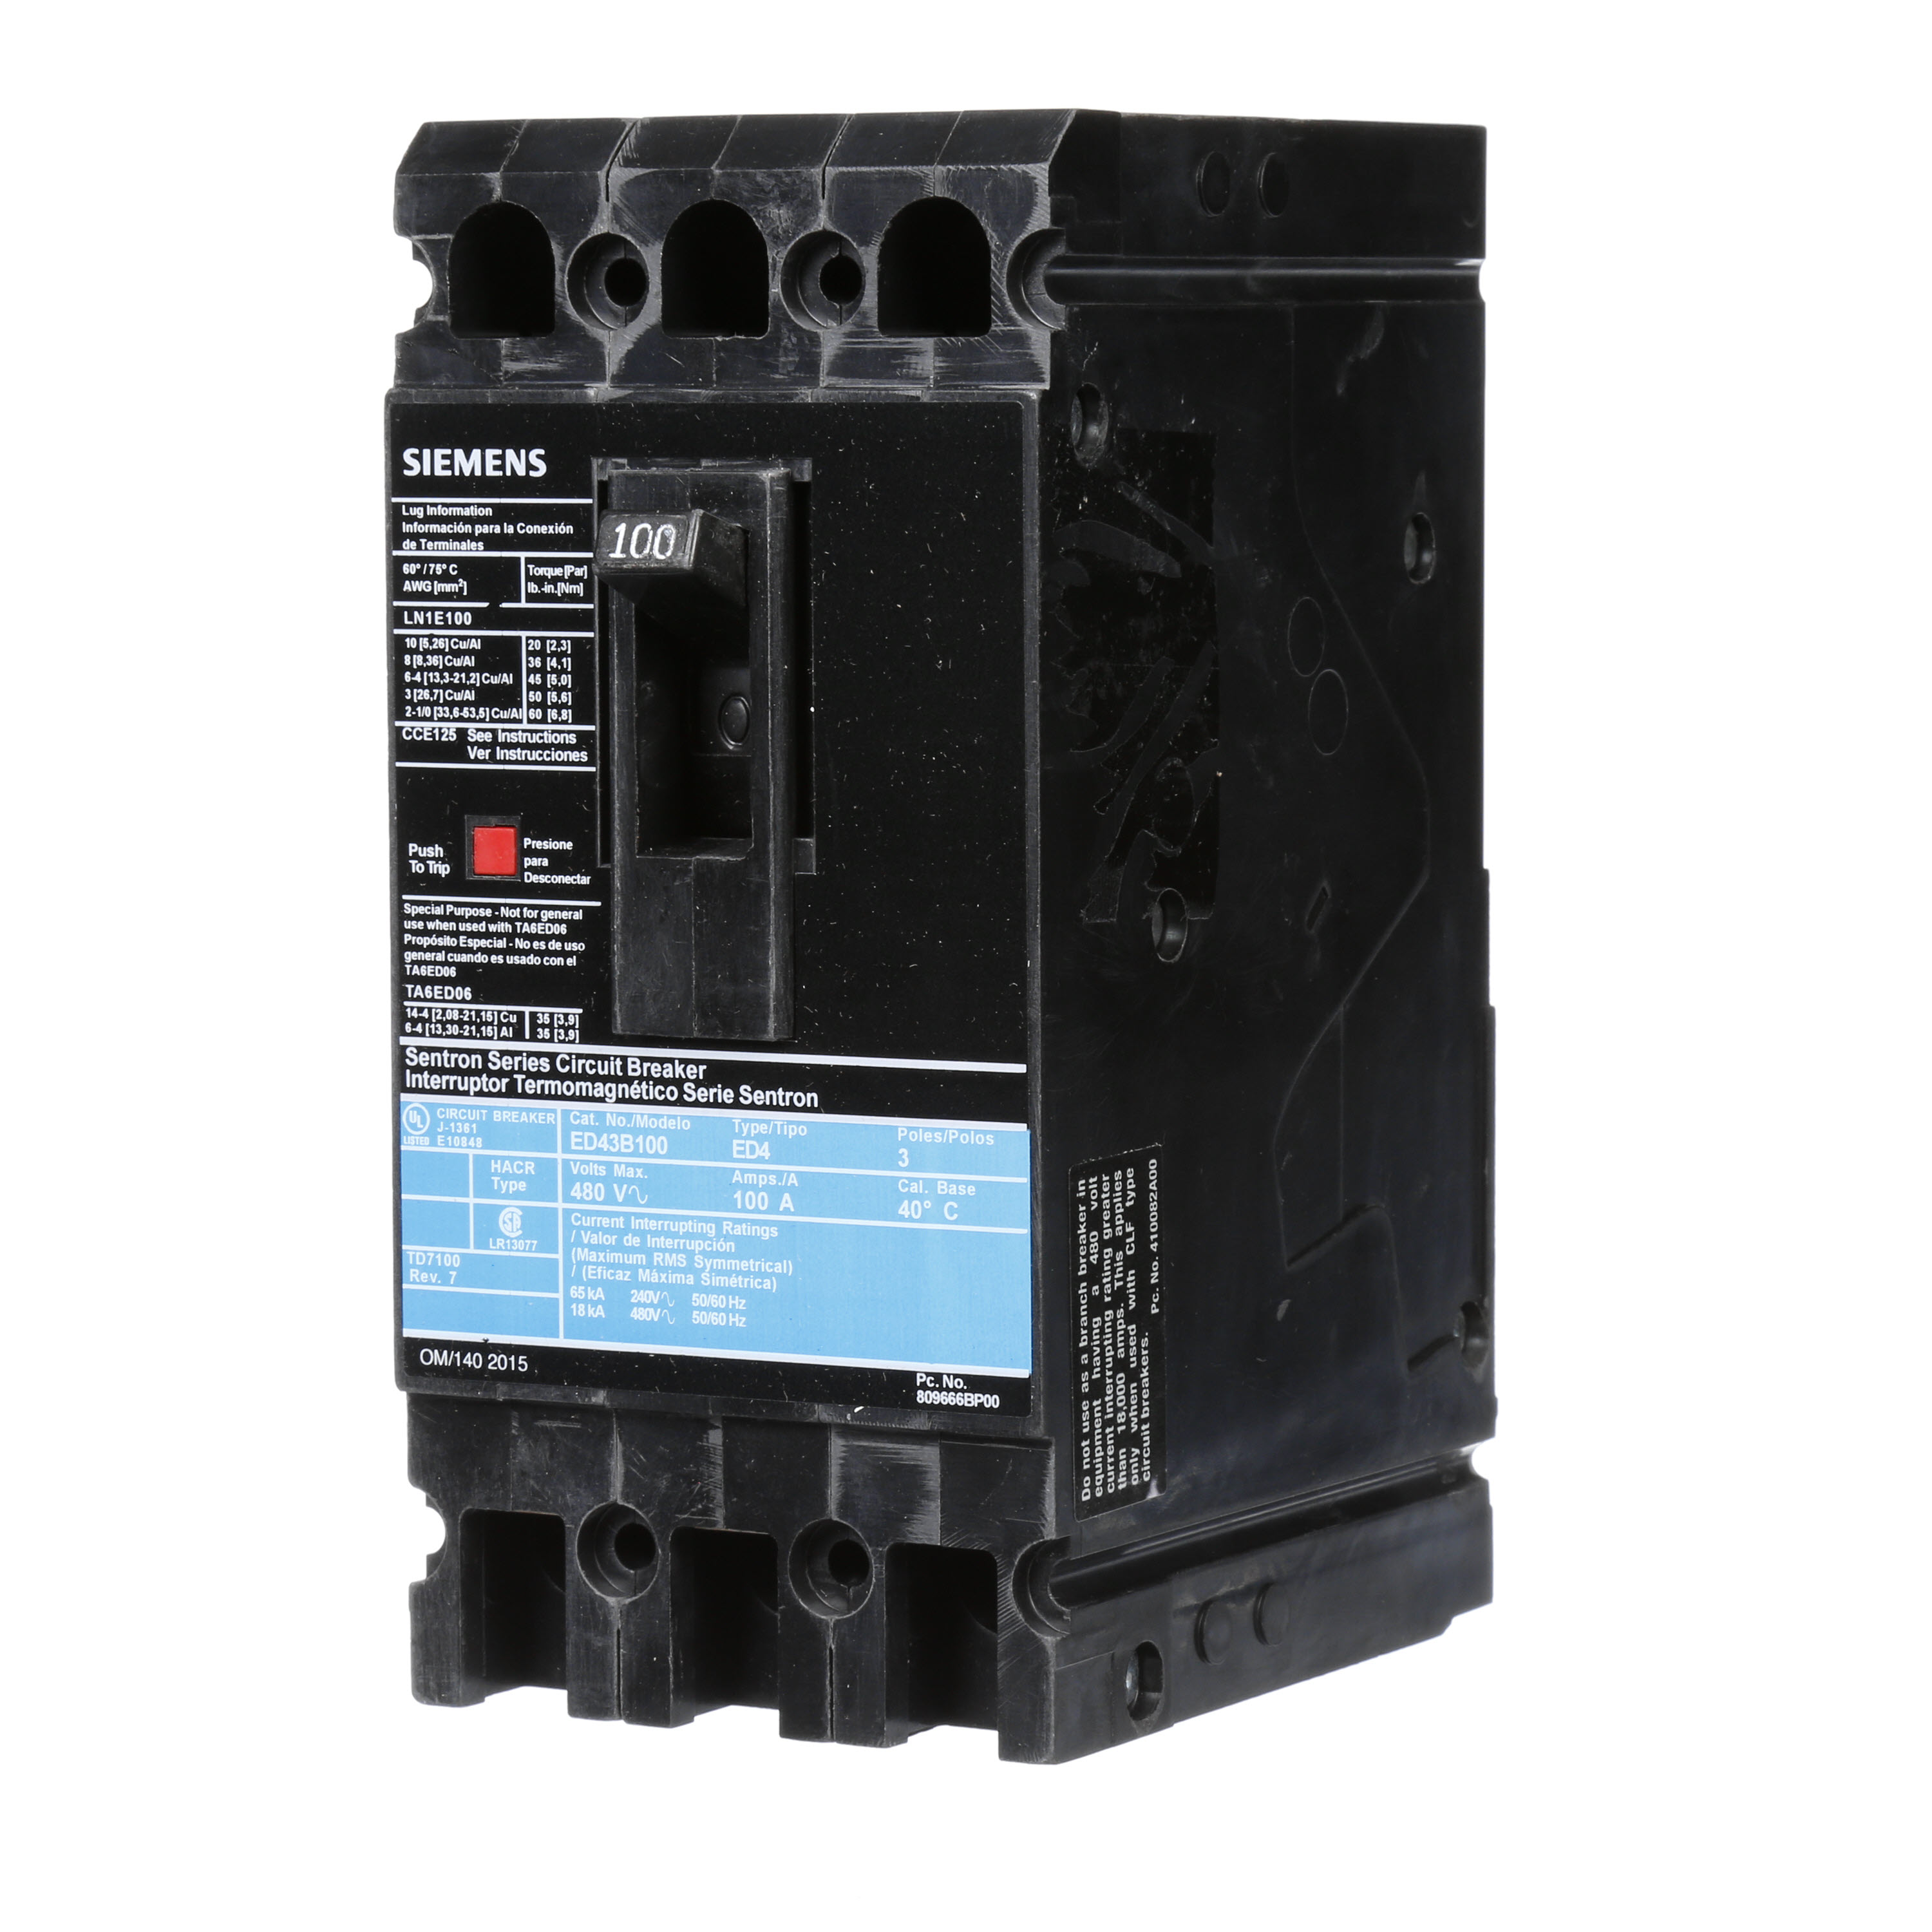 SIEMENS LOW VOLTAGE SENTRON MOLDED CASE CIRCUIT BREAKER WITH THERMAL - MAGNETICTRIP UNIT. STANDARD 40 DEG C BREAKER ED FRAME WITH STANDARD BREAKING CAPACITY. 100A 3-POLE (18KAIC AT 480V). NON-INTERCHANGEABLE TRIP UNIT. SPECIAL FEATURES LINE AND LOAD SIDE LUGS (LN1E100) WIRE RANGE 10 - 1/0AWG (CU/AL). DIMENSIONS (W x H x D) IN 3.00 x 6.4 x 3.92.